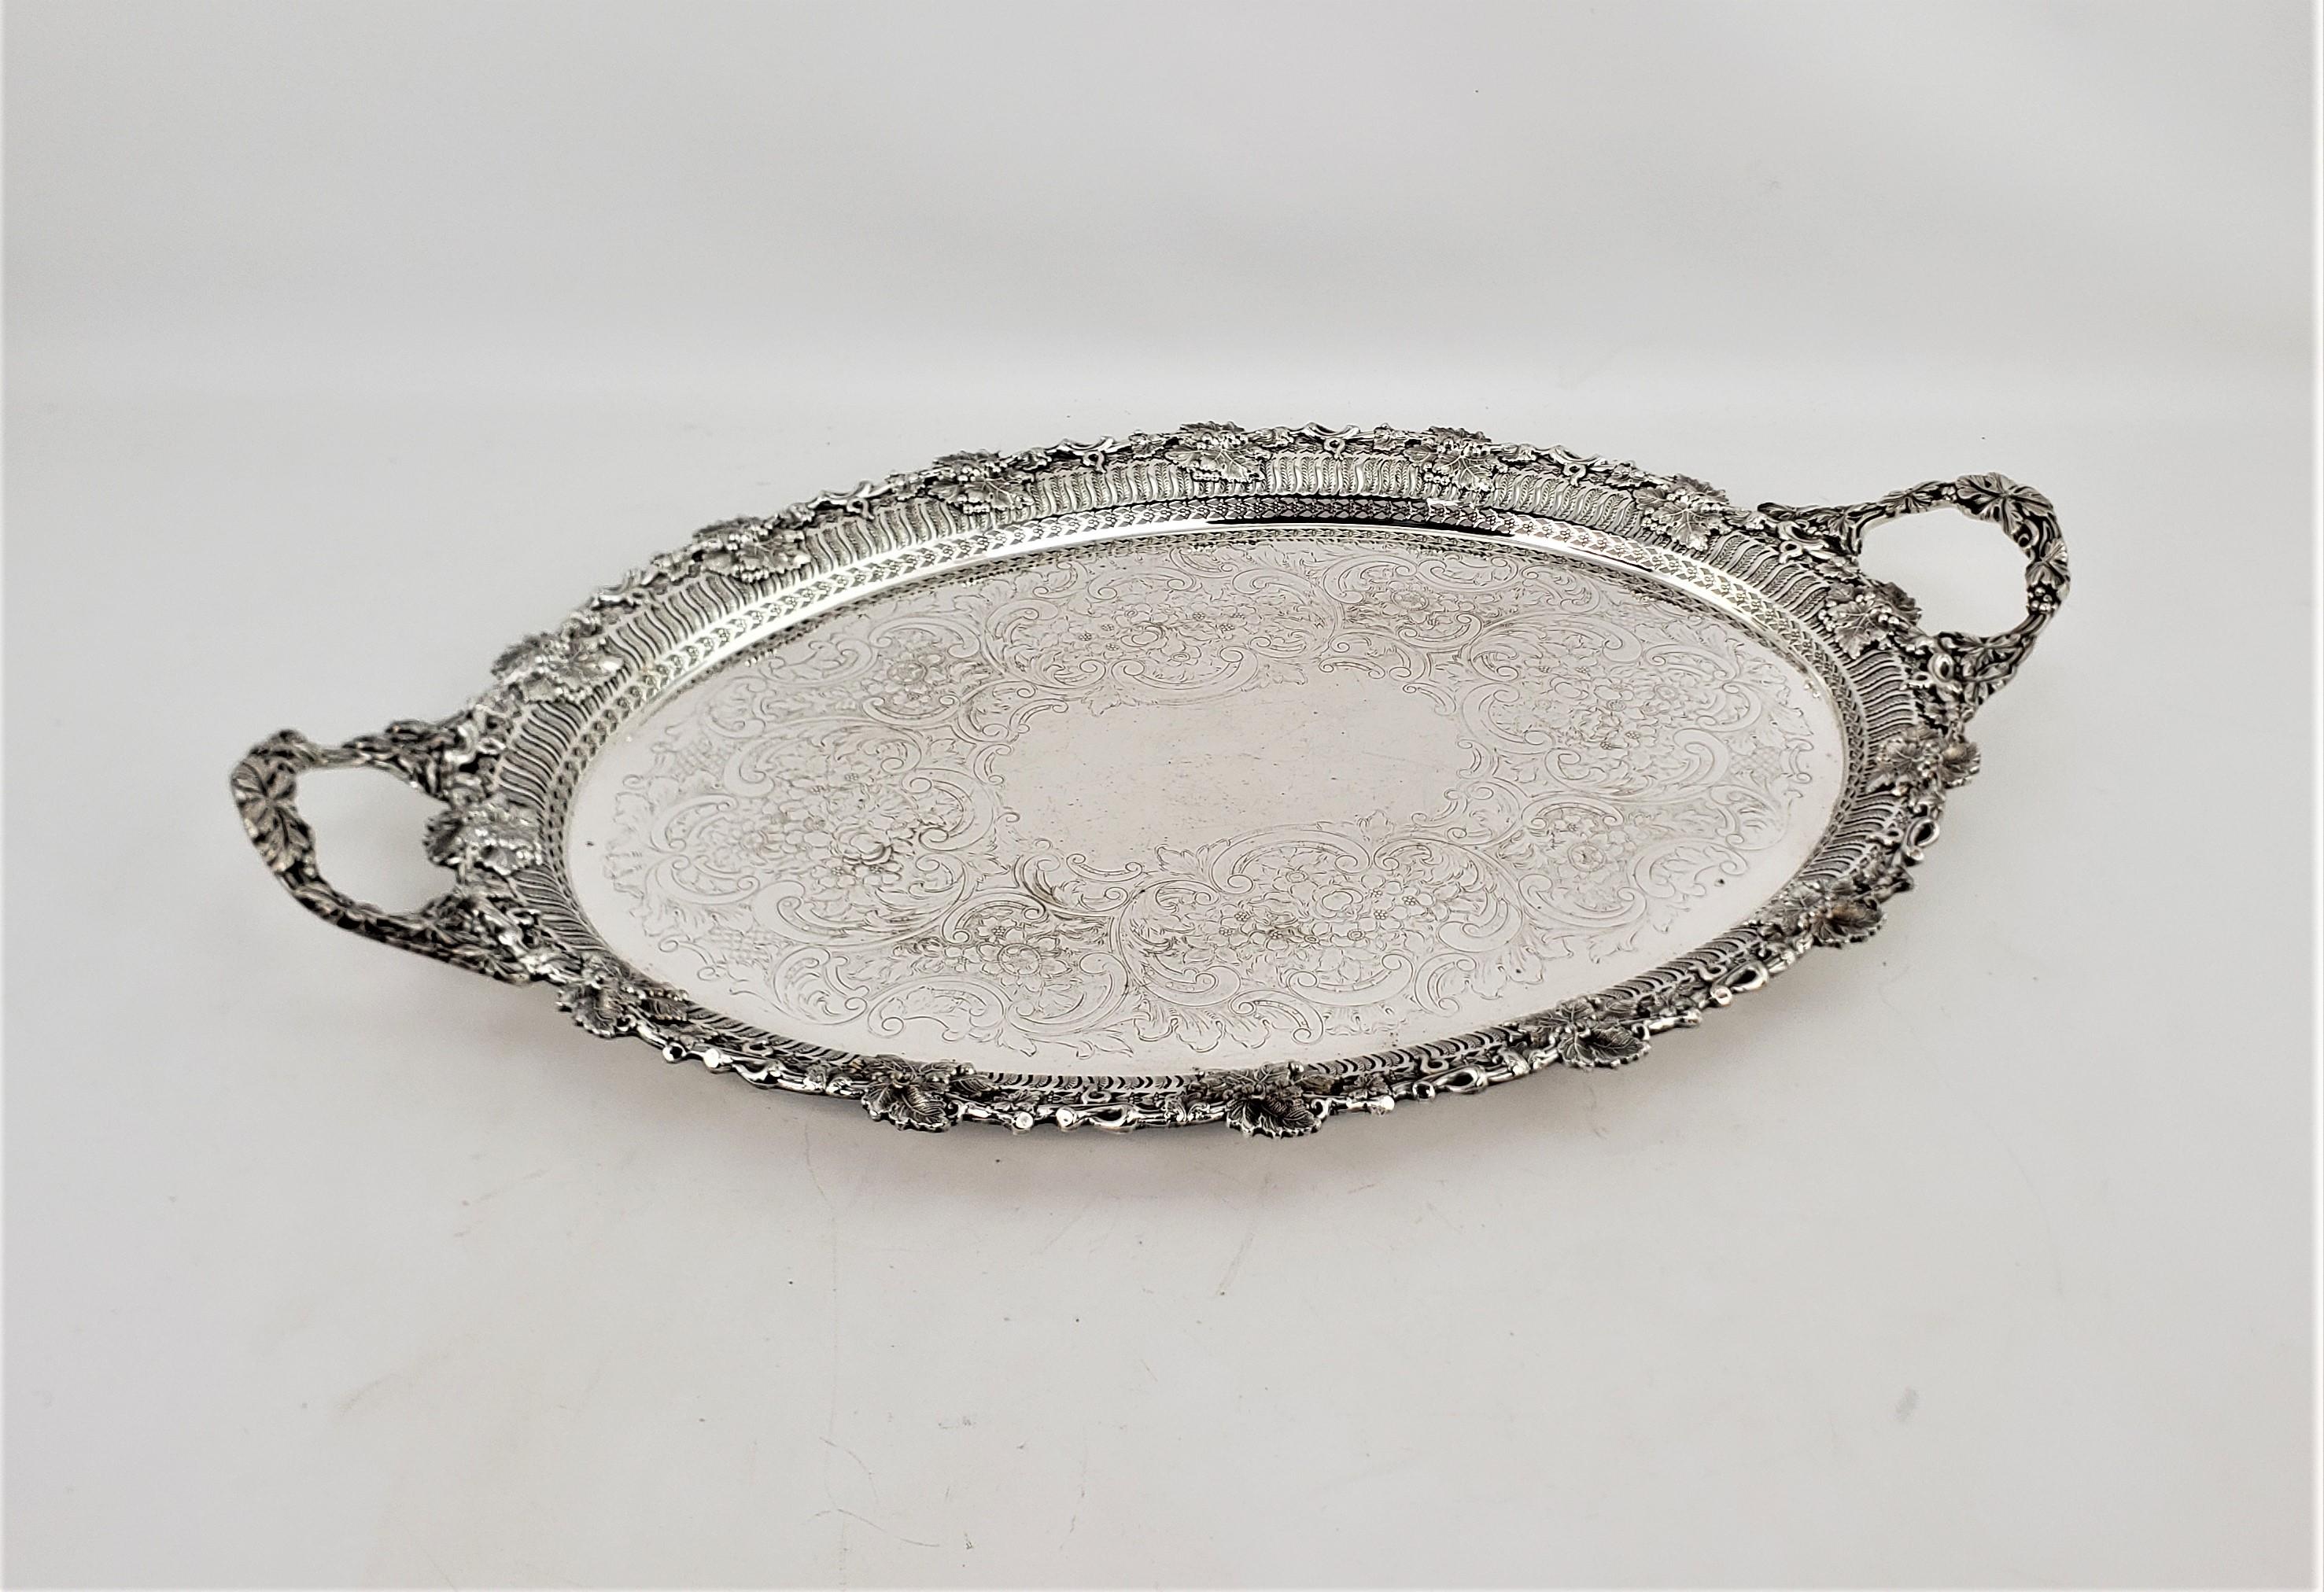 This antique oval footed silver plated serving tray was made by the renowned Barker-Ellis Silver Co. of England in approximately 1920 in a Victorian style. The raised surround of the tray is ornately decorated with oak leaves and acorns, and the